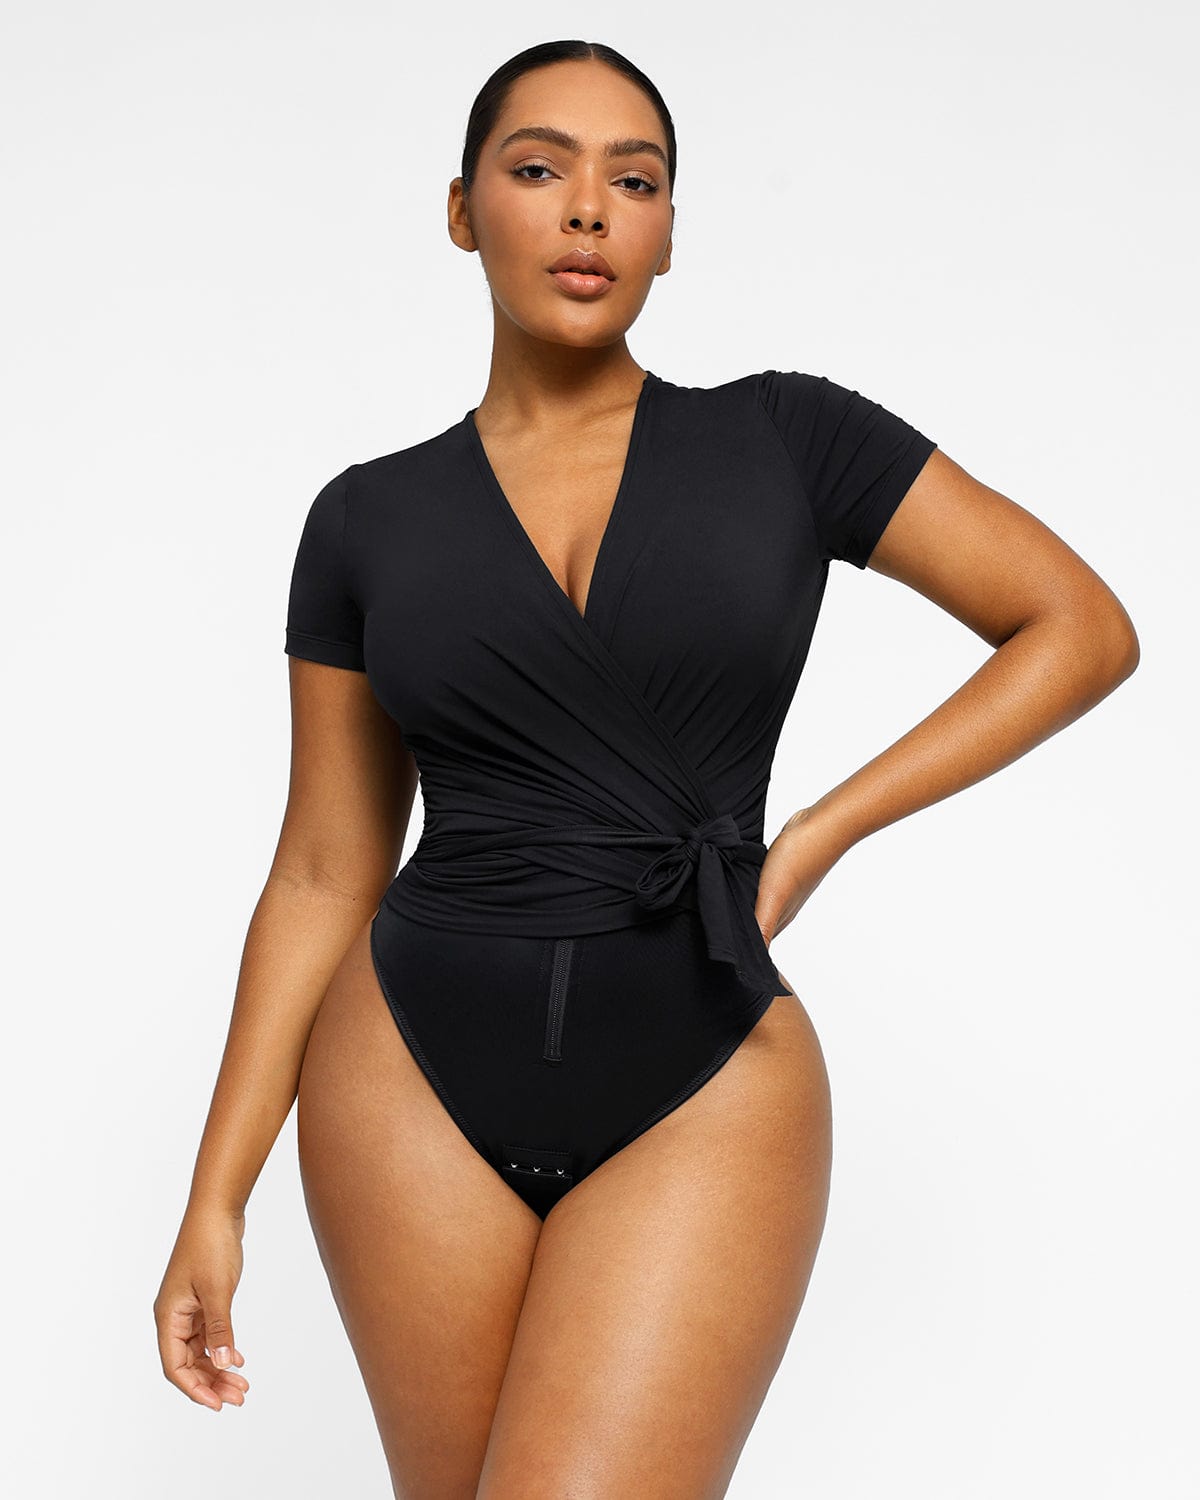 Enhance Your Outfit Instantly with Shapellx Shapewear - Analisa Muya